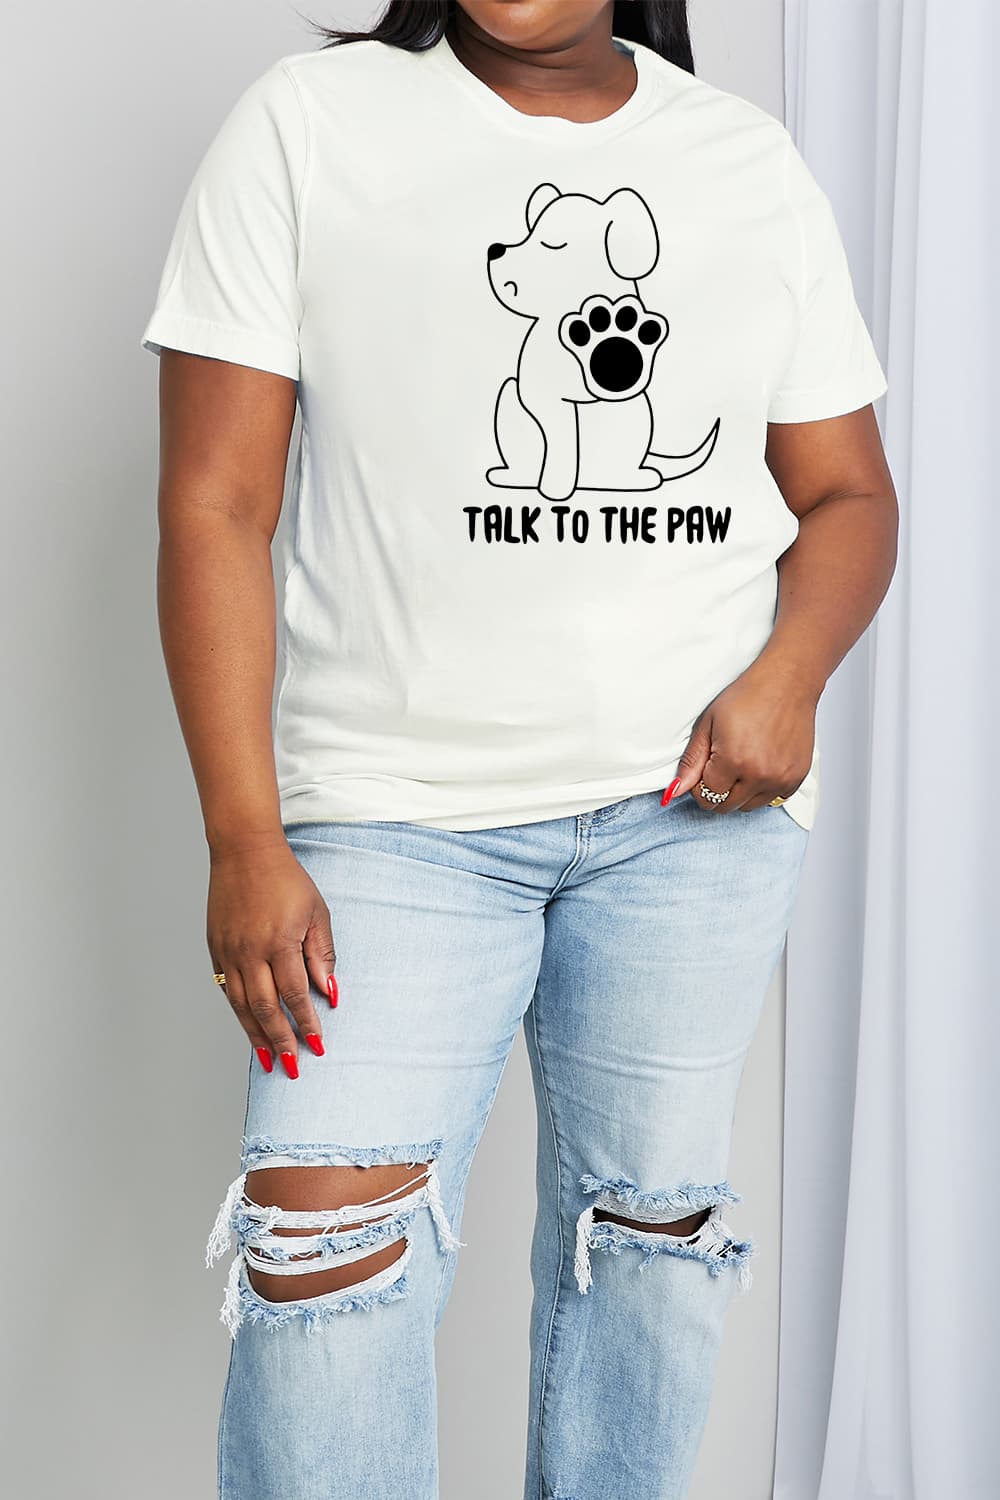 Simply Love Simply Love Full Size TALK TO THE PAW Graphic Cotton Tee - Kawaii Stop - Kawaii Shop